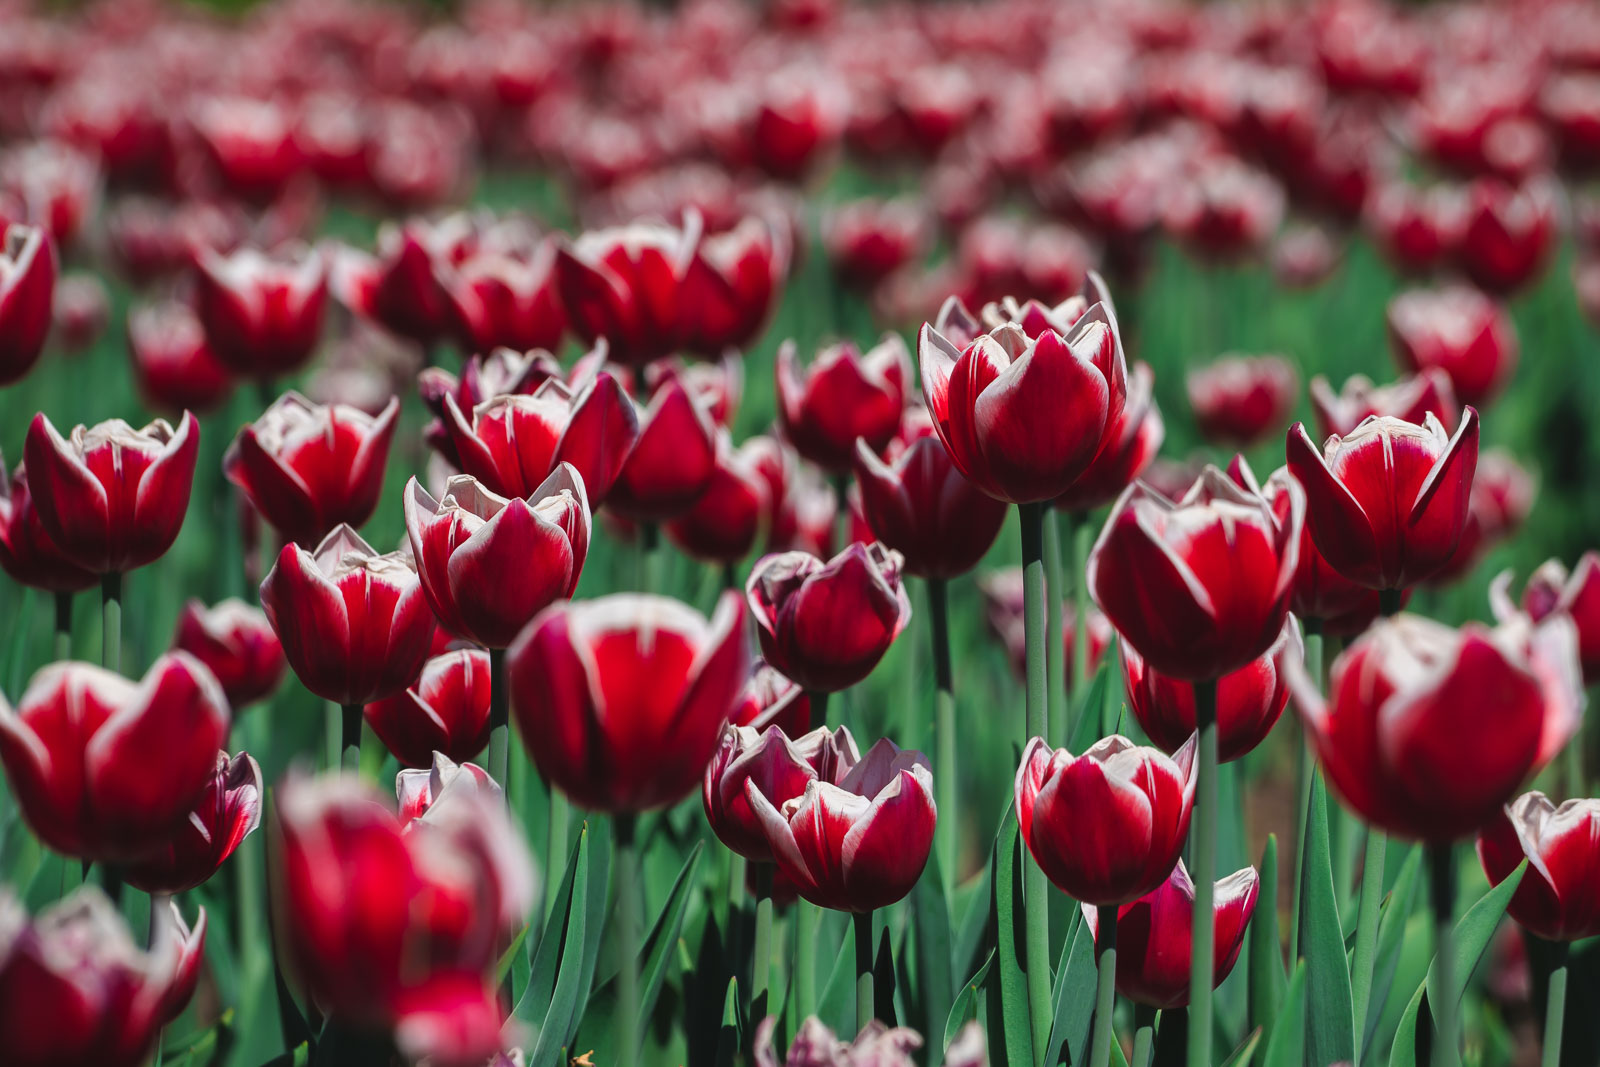 Best Places for Photos at the Ottawa Tulip Festival